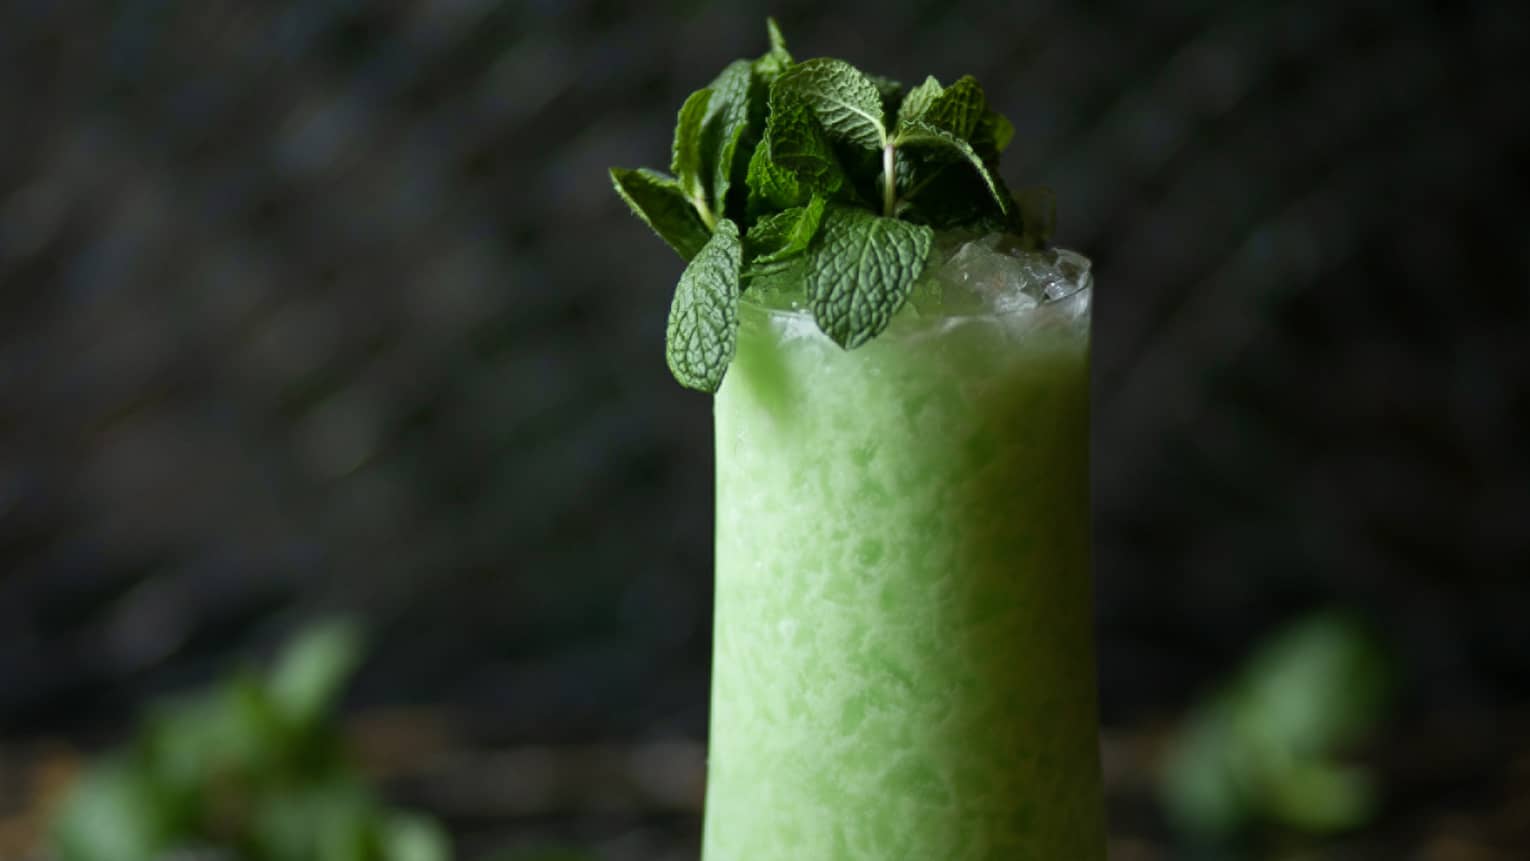 A neon green icy cocktail in a tall glass garnished with fresh mint leaves set against a dramatic dark background.